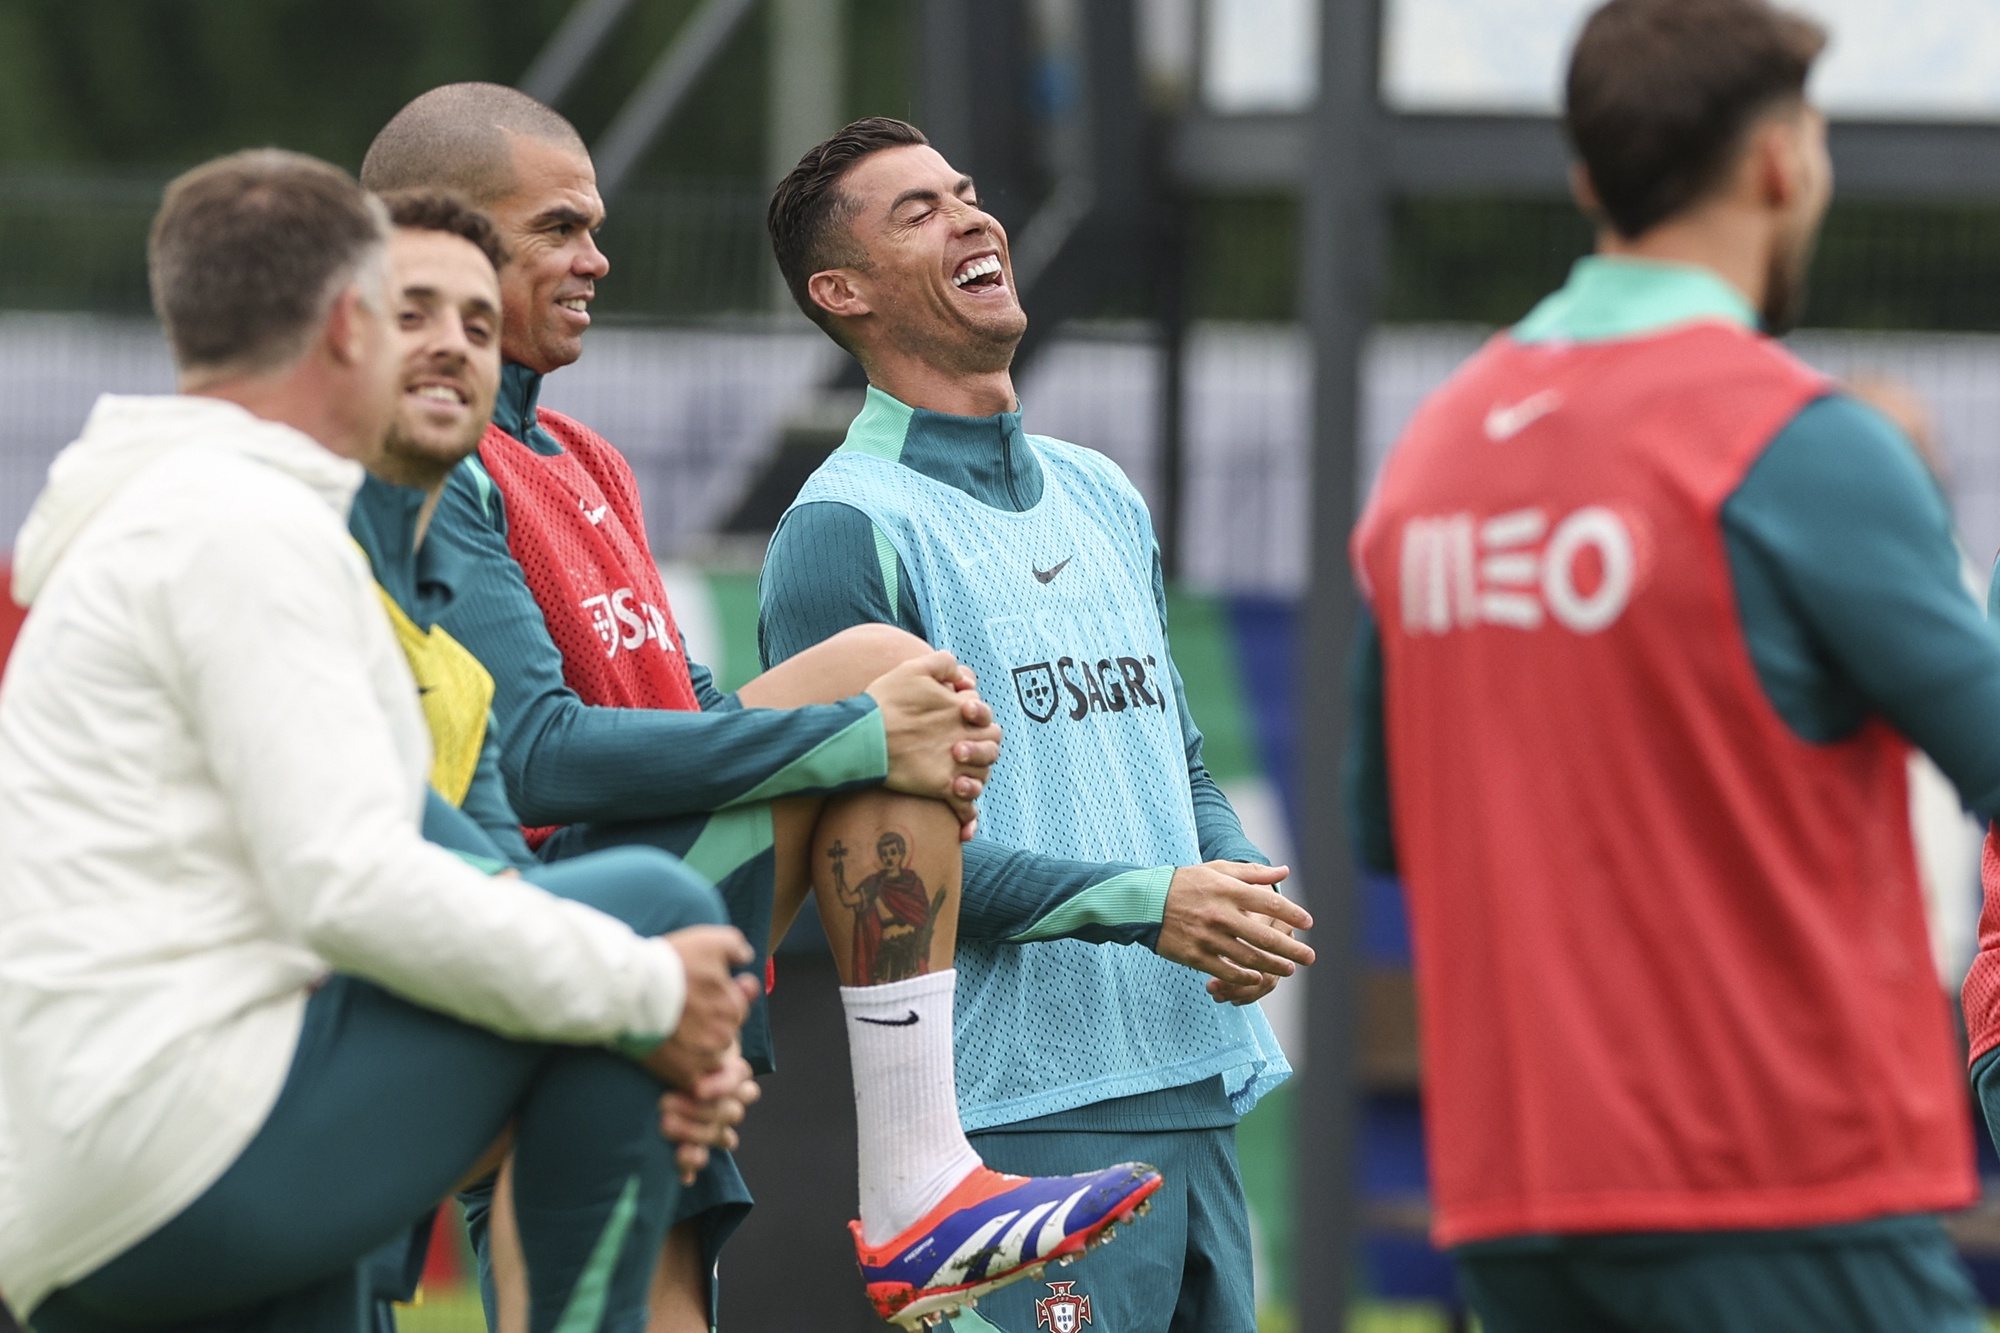 Portugal national soccer team players (L-R) Diogo Jota, Pepe, Cristiano Ronaldo and Ruben Dias during a training session in Marienfeld, Harsewinkel, Germany, 20 June 2024. The Portuguese national soccer team is based in Marienfeld, Harsewinkel during the UEFA EURO 2024. MIGUEL A. LOPES/LUSA